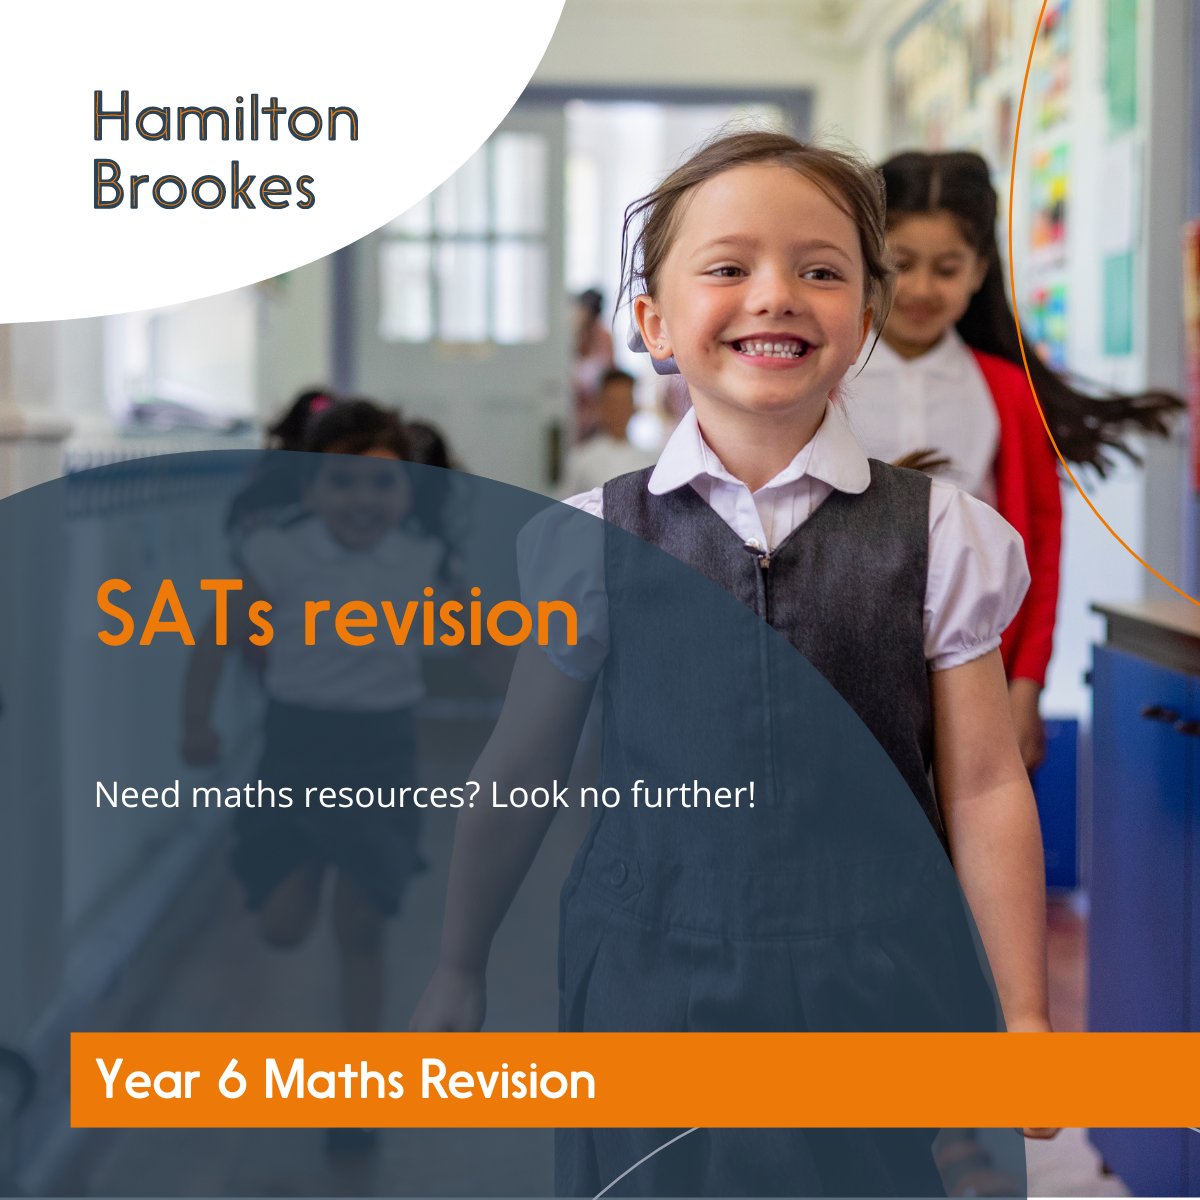 Are you looking for great maths revision resources for your Year 6 class? With SATs very much on the horizon, our maths planning ensures that every part of the Year 6 content is covered and revised before the statutory assessments in mid-May. loom.ly/RaRIQH0